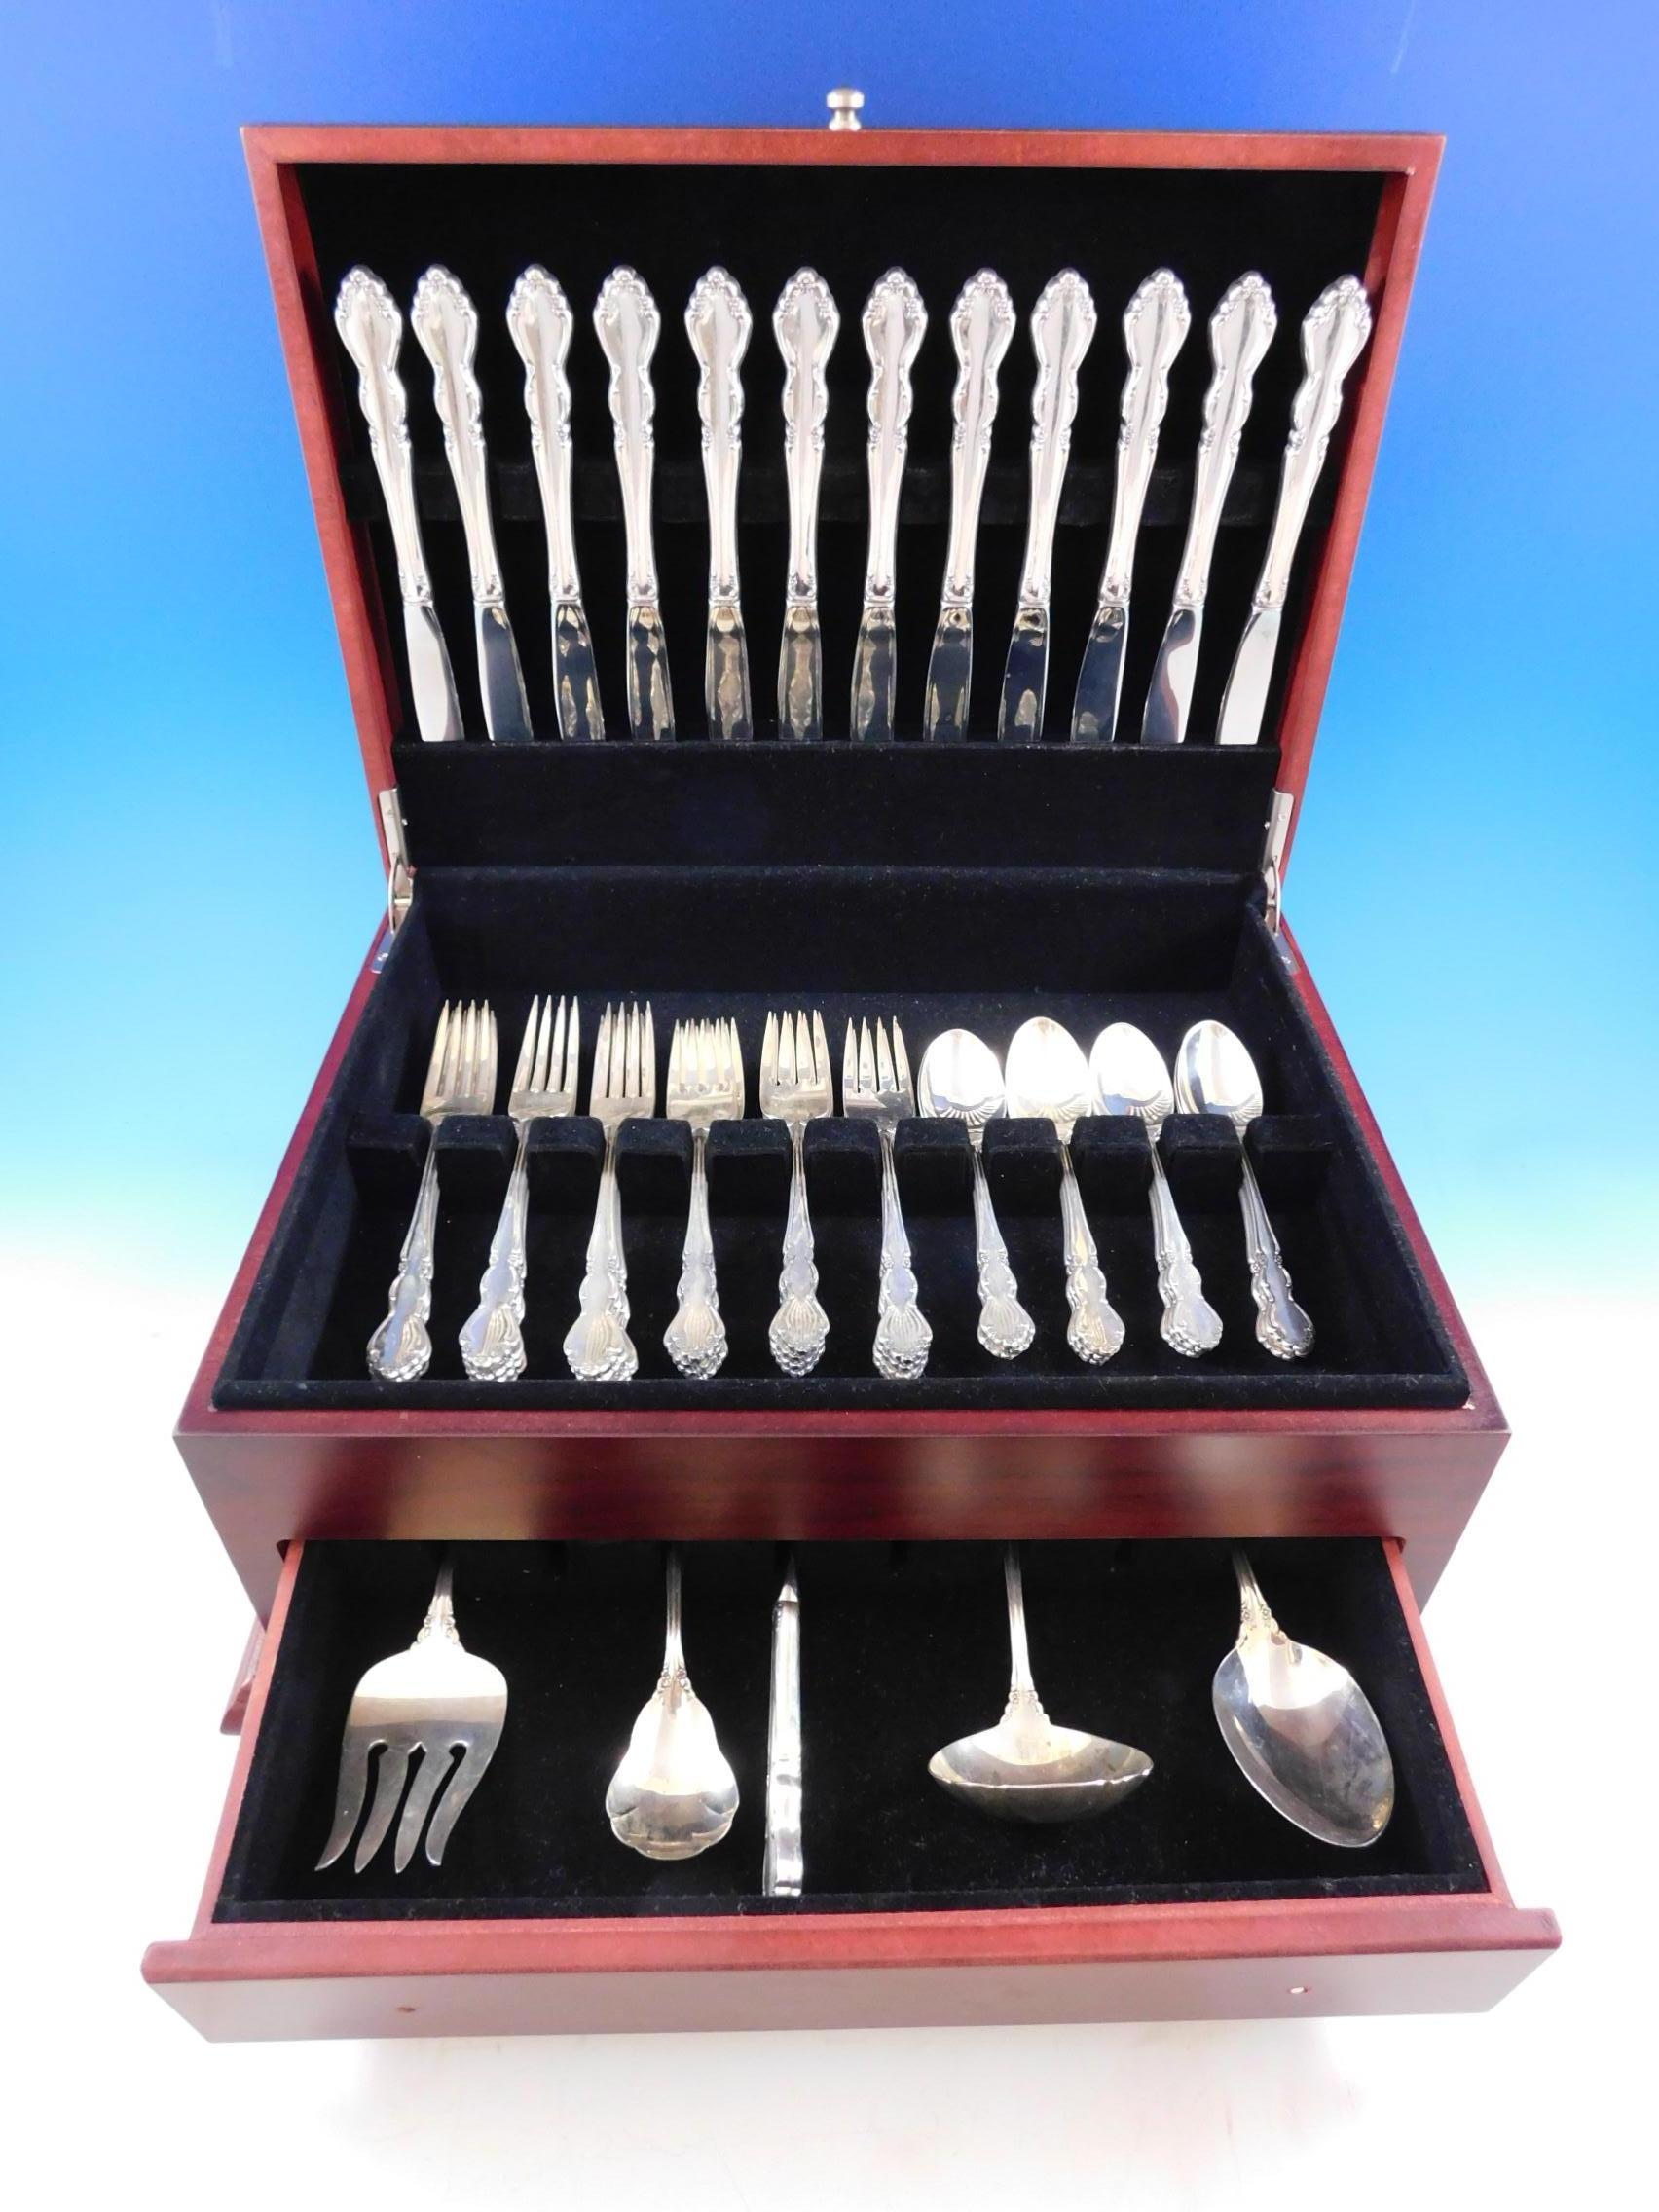 Dover by Oneida sterling silver flatware set, 53 pieces. This set includes:

12 knives, 9